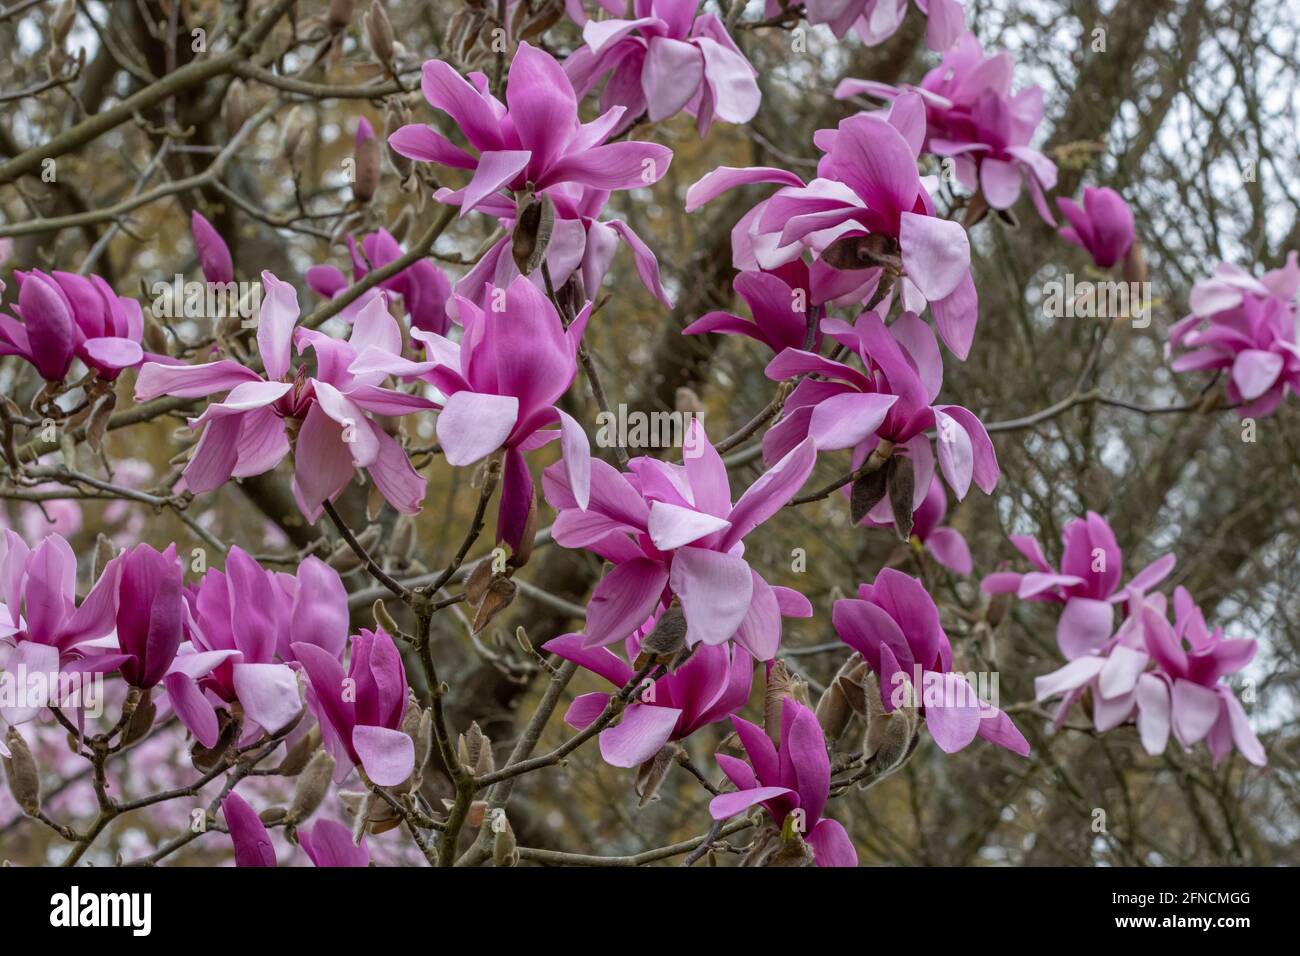 Mass of large purple Magnolia Ruth flowers in spring Stock Photo